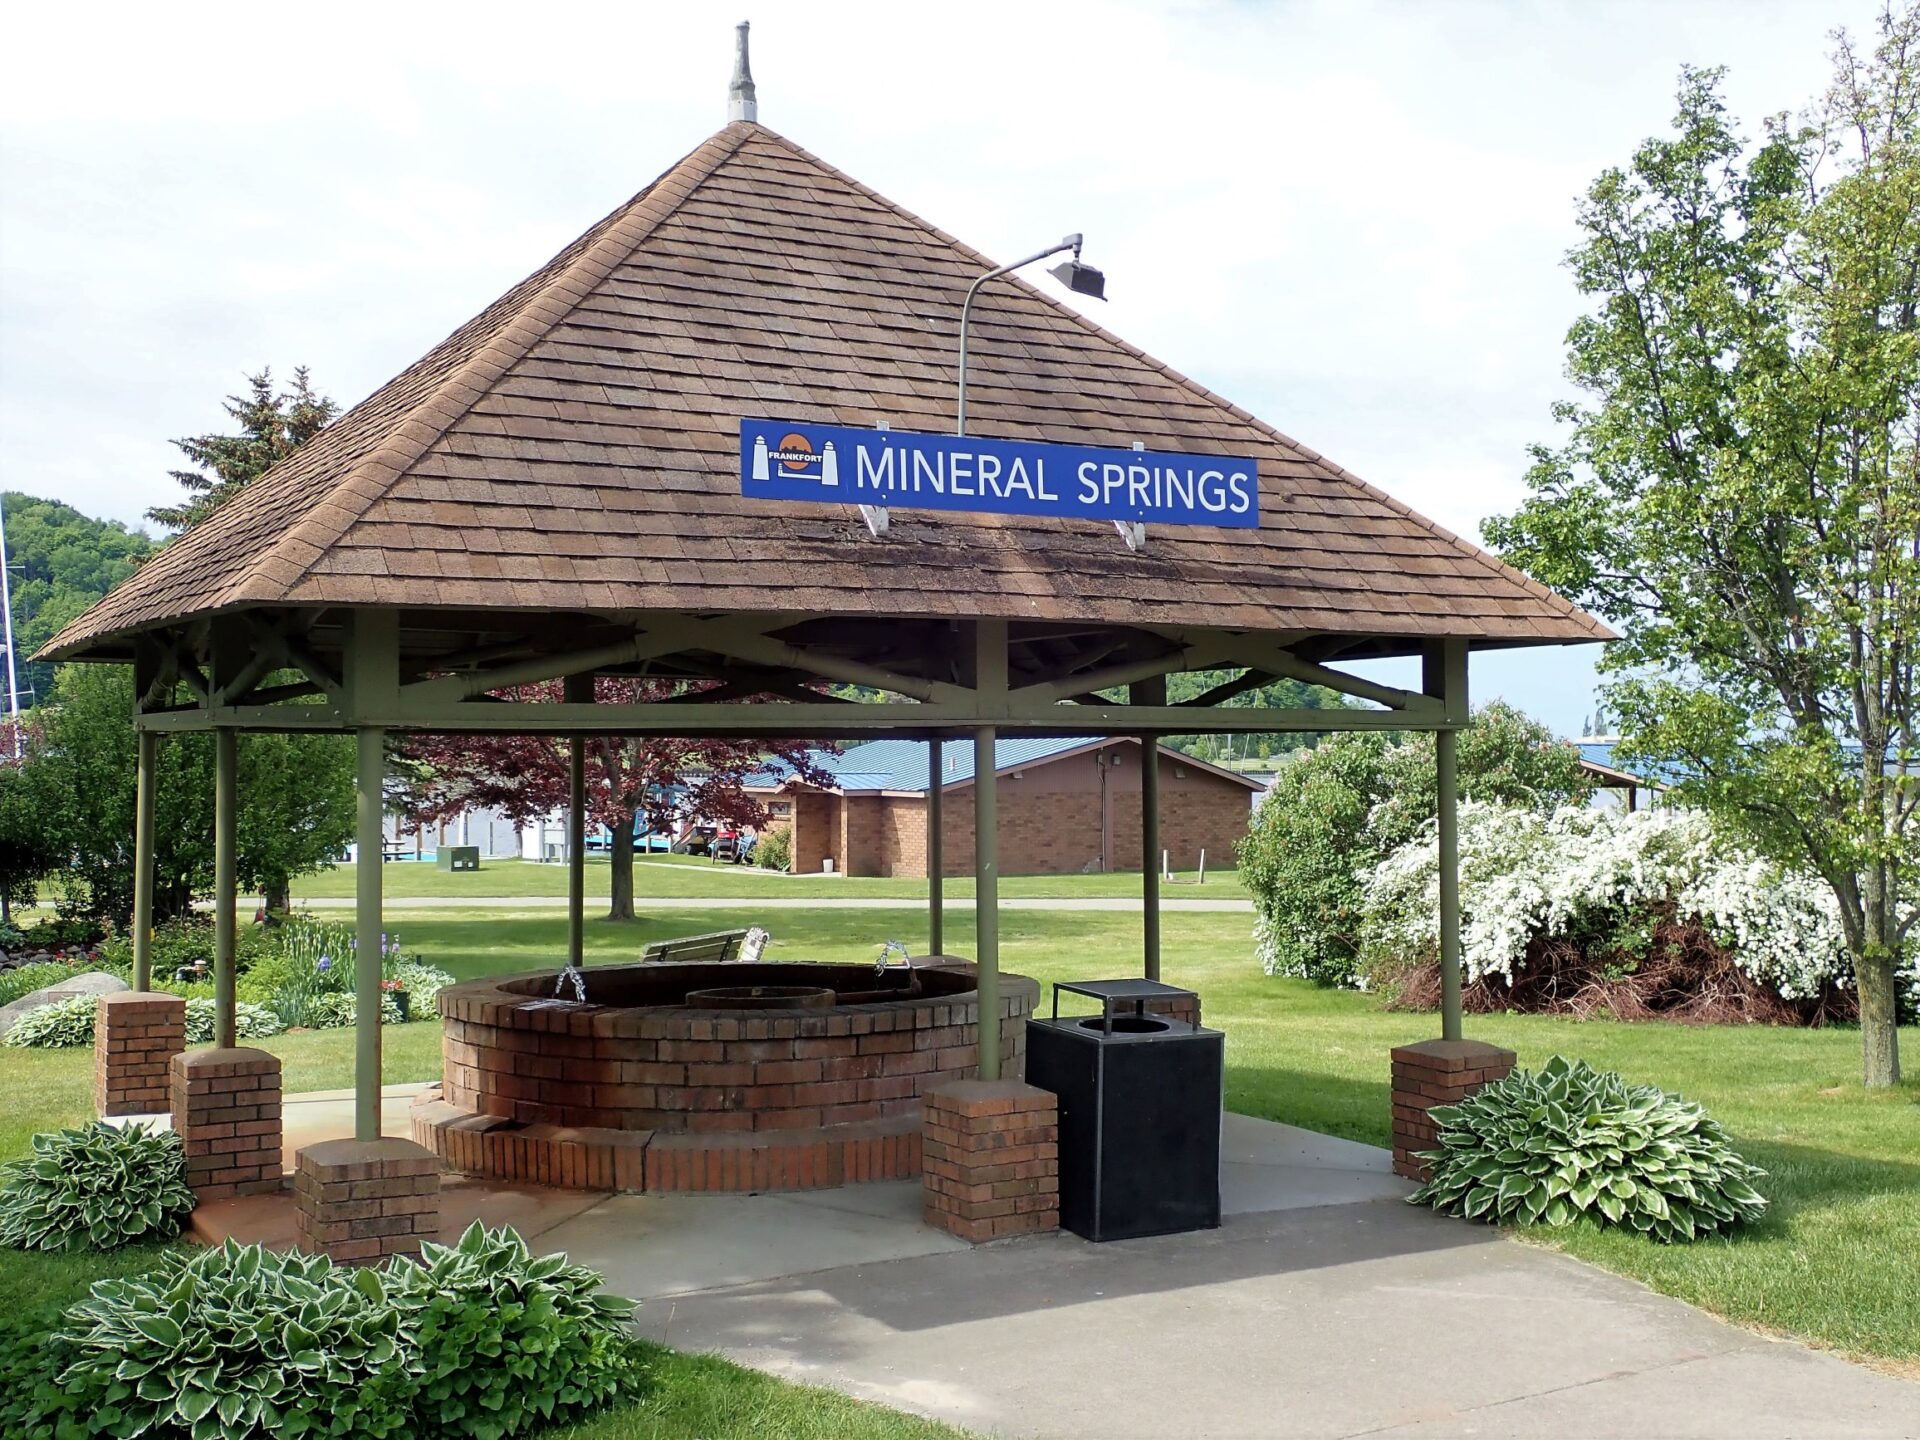 Mineral Springs Park in Frankfort, Michigan